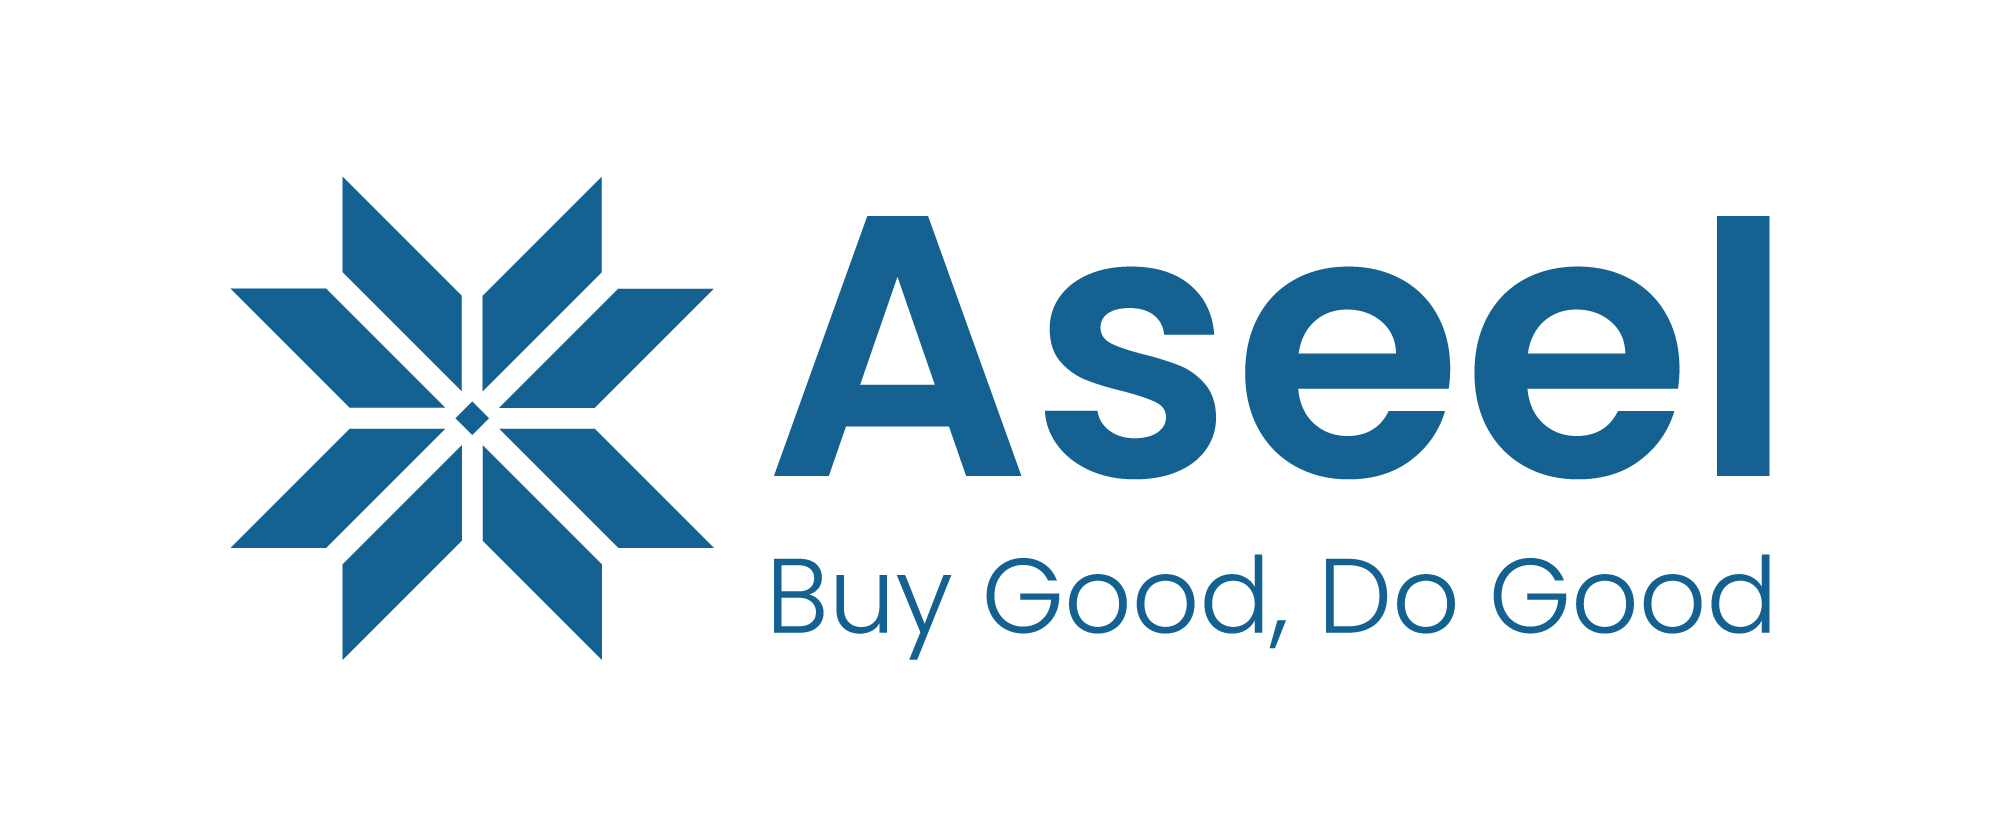 The Aseel Artisan Funds